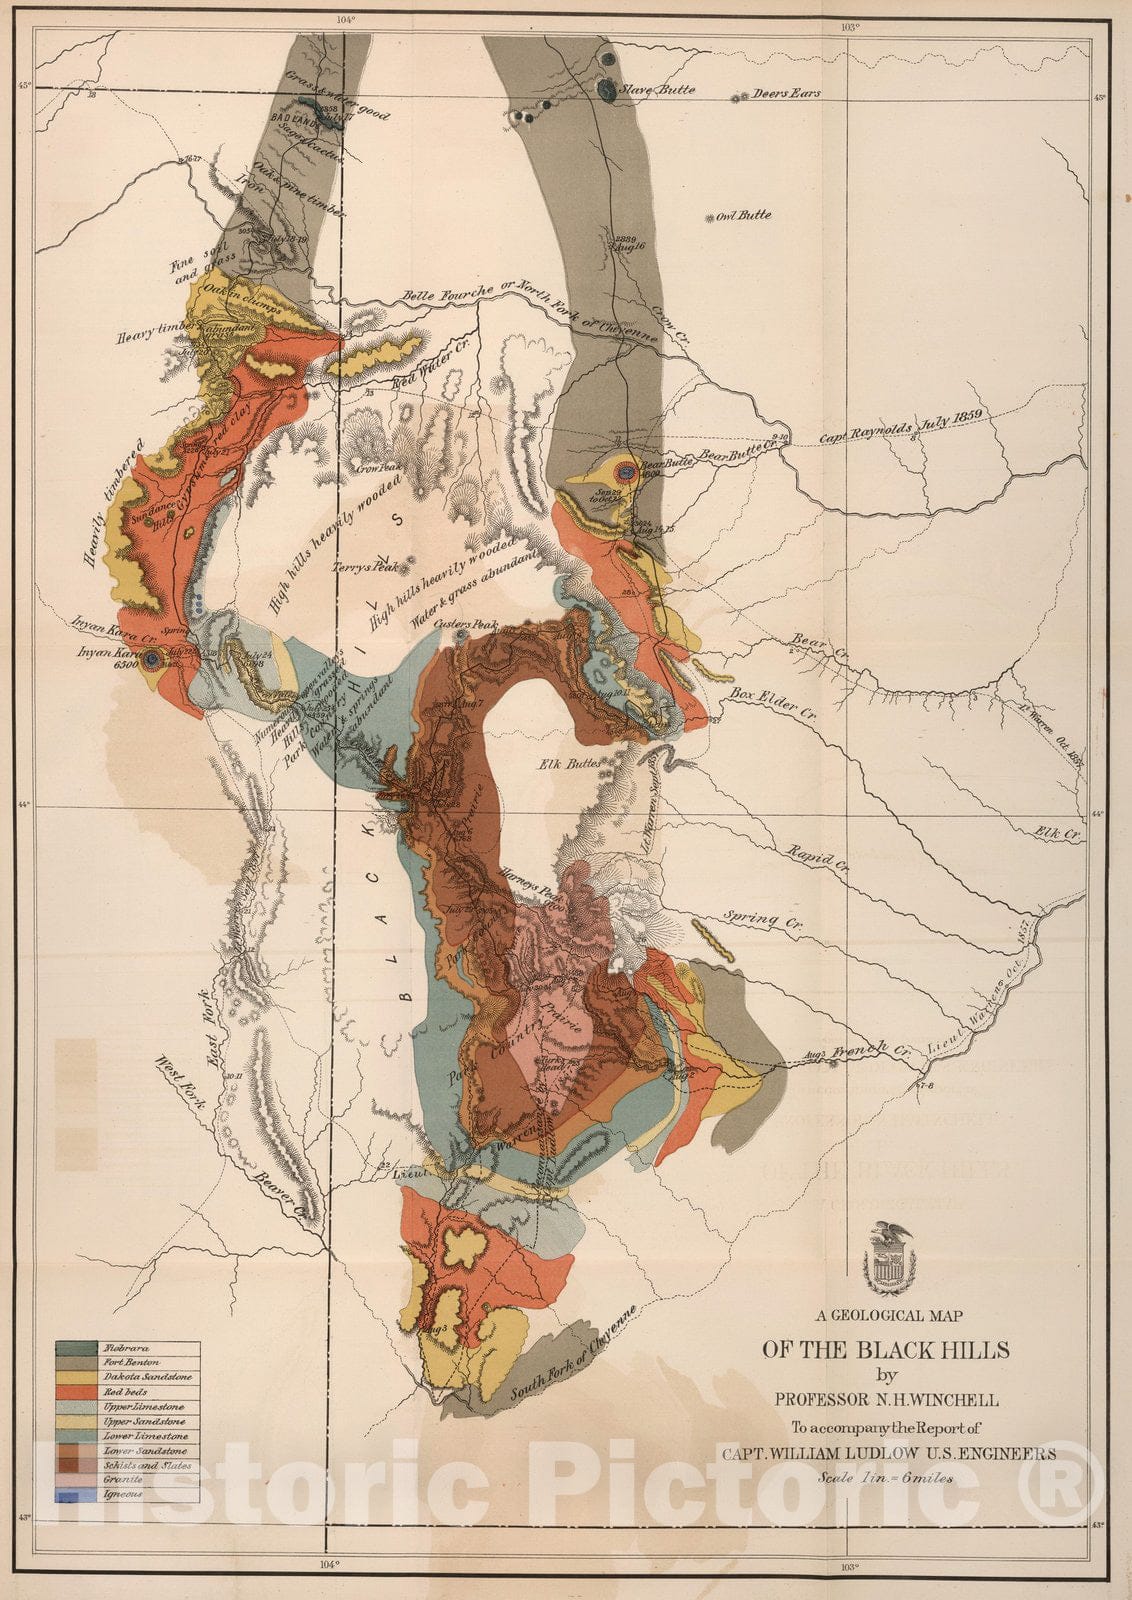 Historic Map - A geological map of the Black Hills: by Professor N.H. Winchell, 1874 - Vintage Wall Art